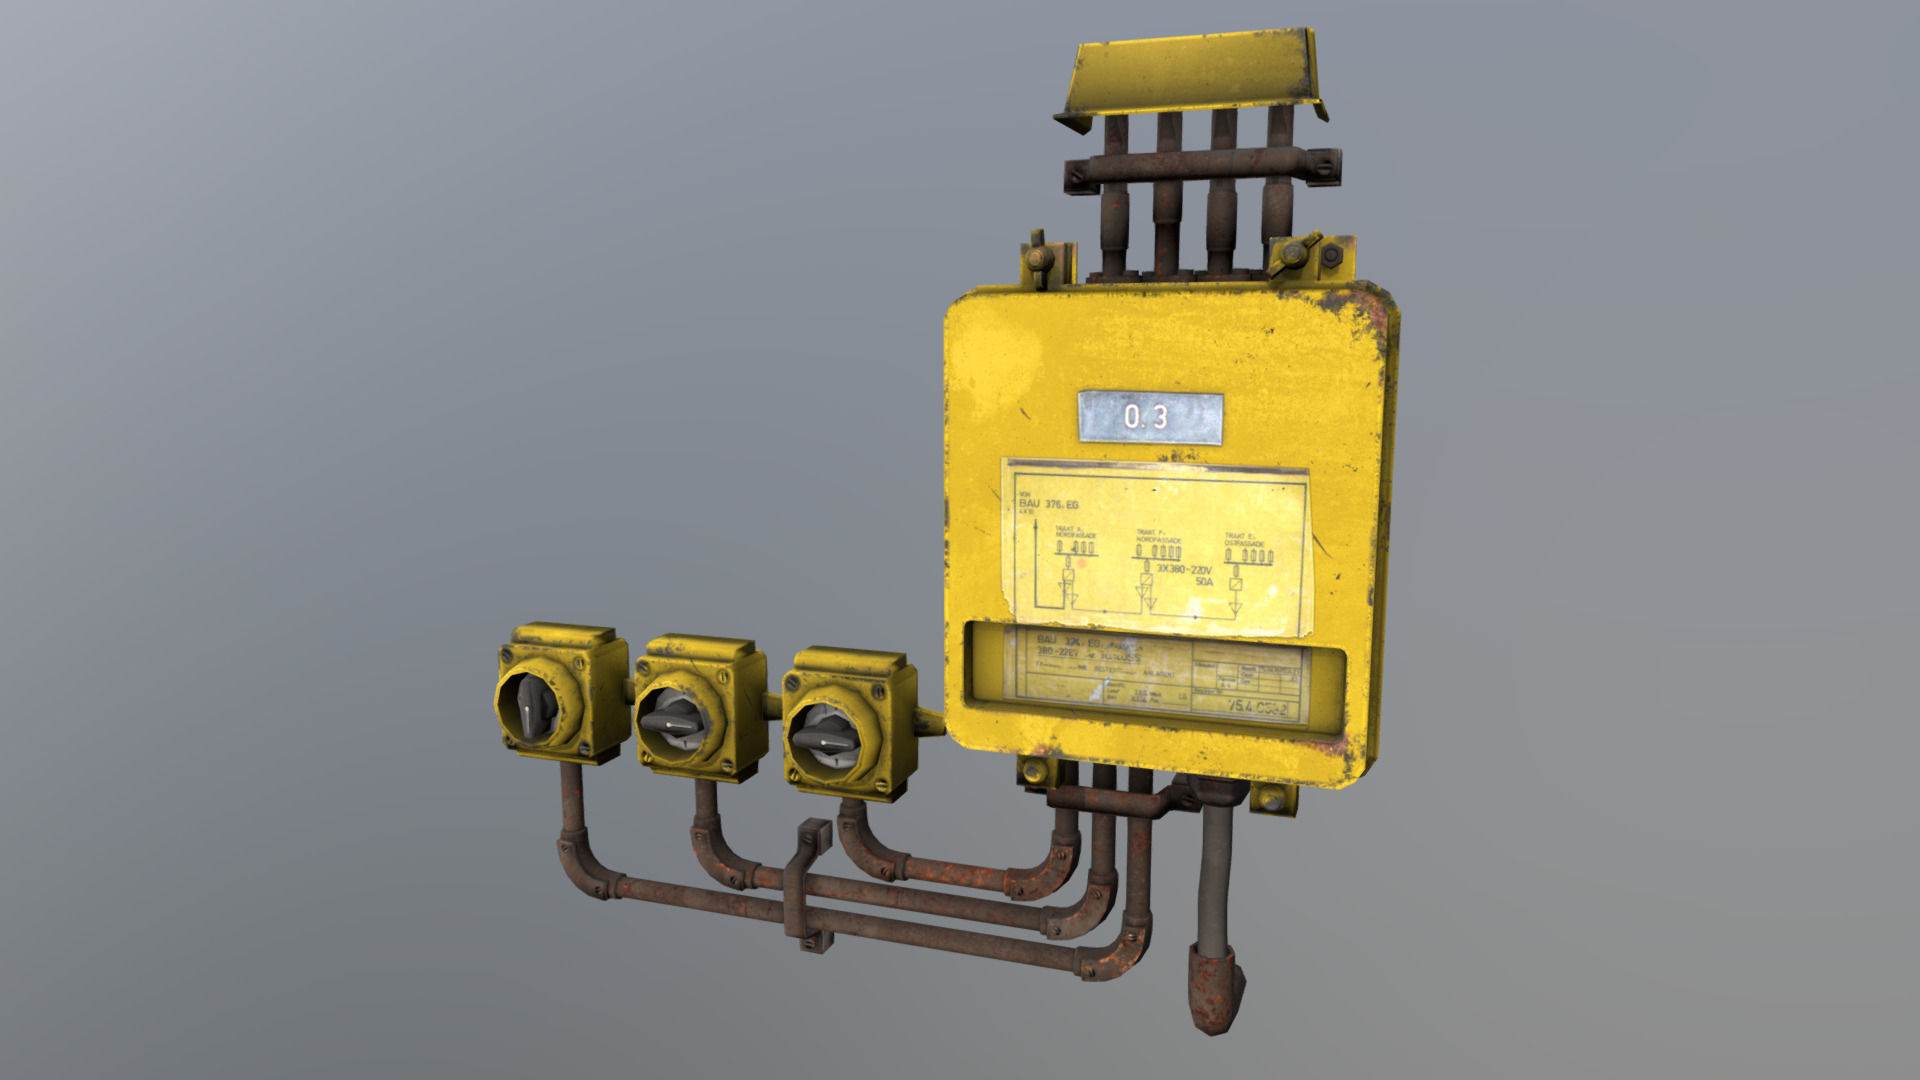 3D model Low Poly Electricity Box 05 - This is a 3D model of the Low Poly Electricity Box 05. The 3D model is about a yellow and black machine.